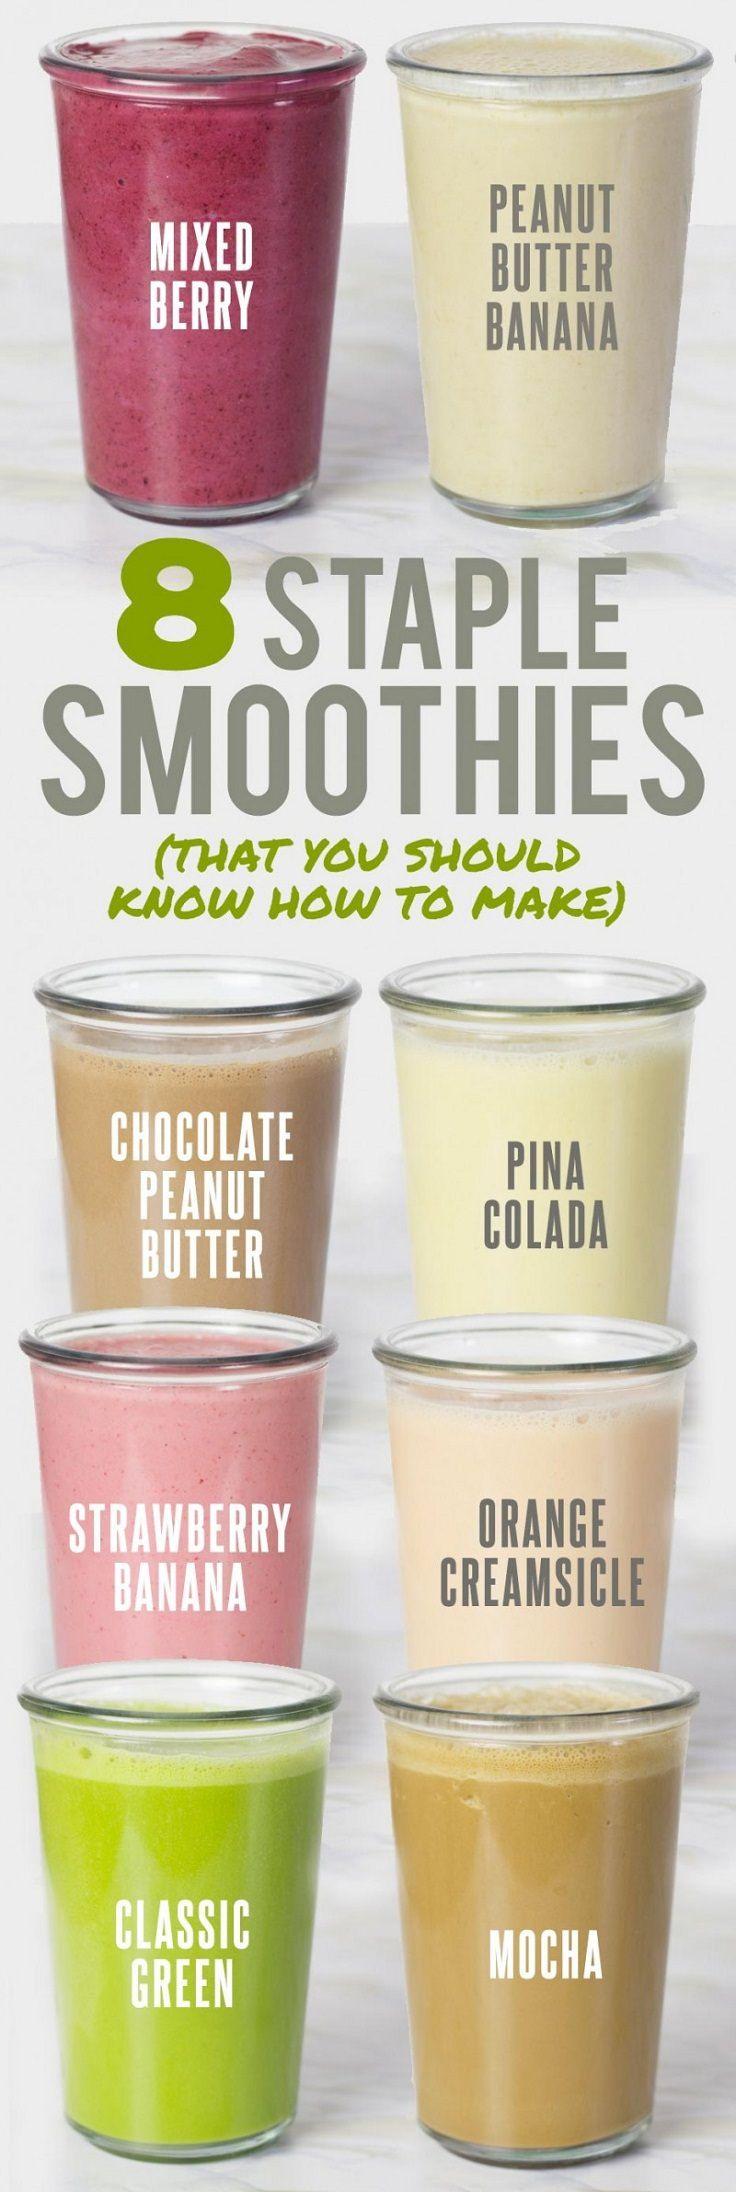 Wedding - 8 Staple Smoothies You Should Know How To Make